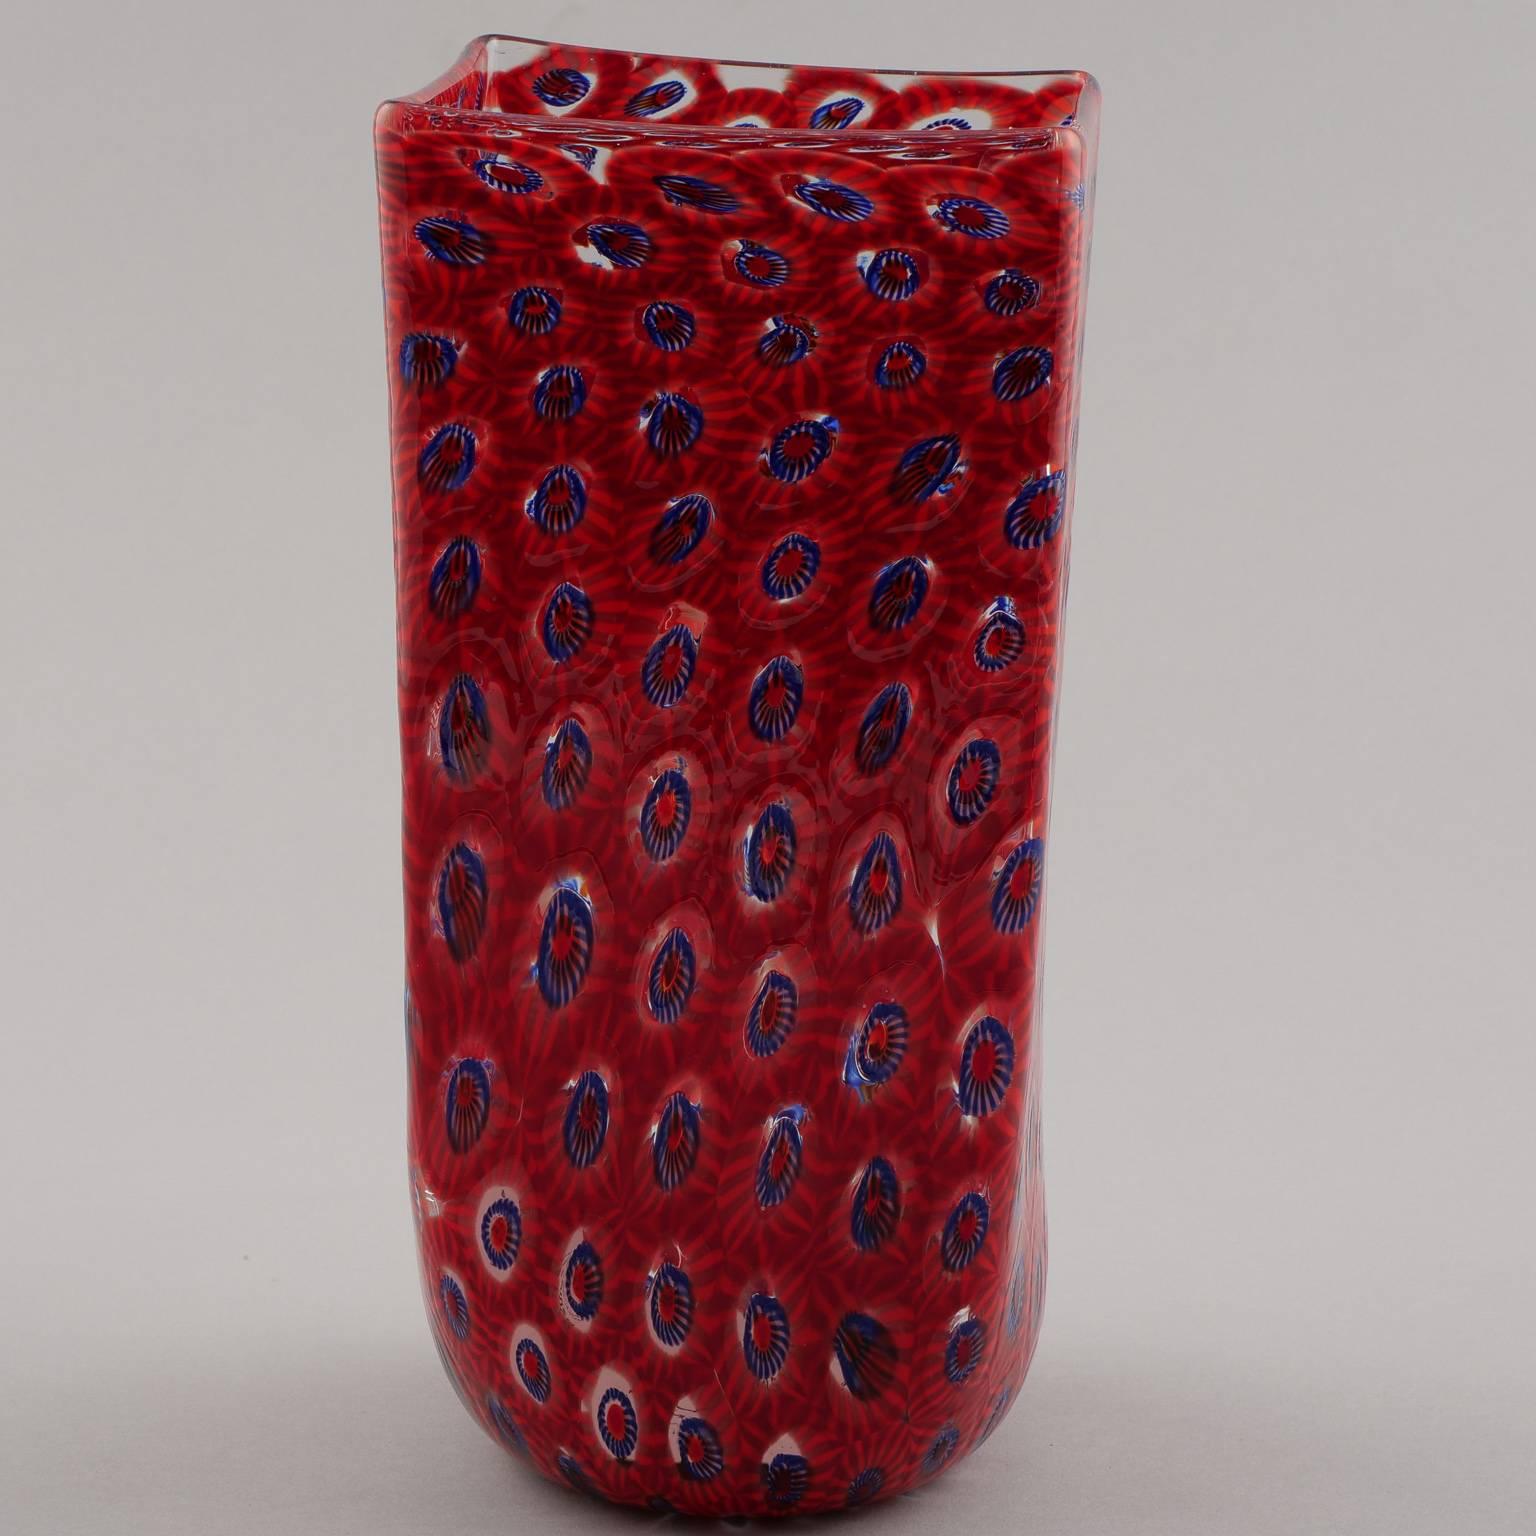 New tall square top Murano glass vase in ruby red with blue flowers by Formentello. Etched signature on the bottom and maker’s card.